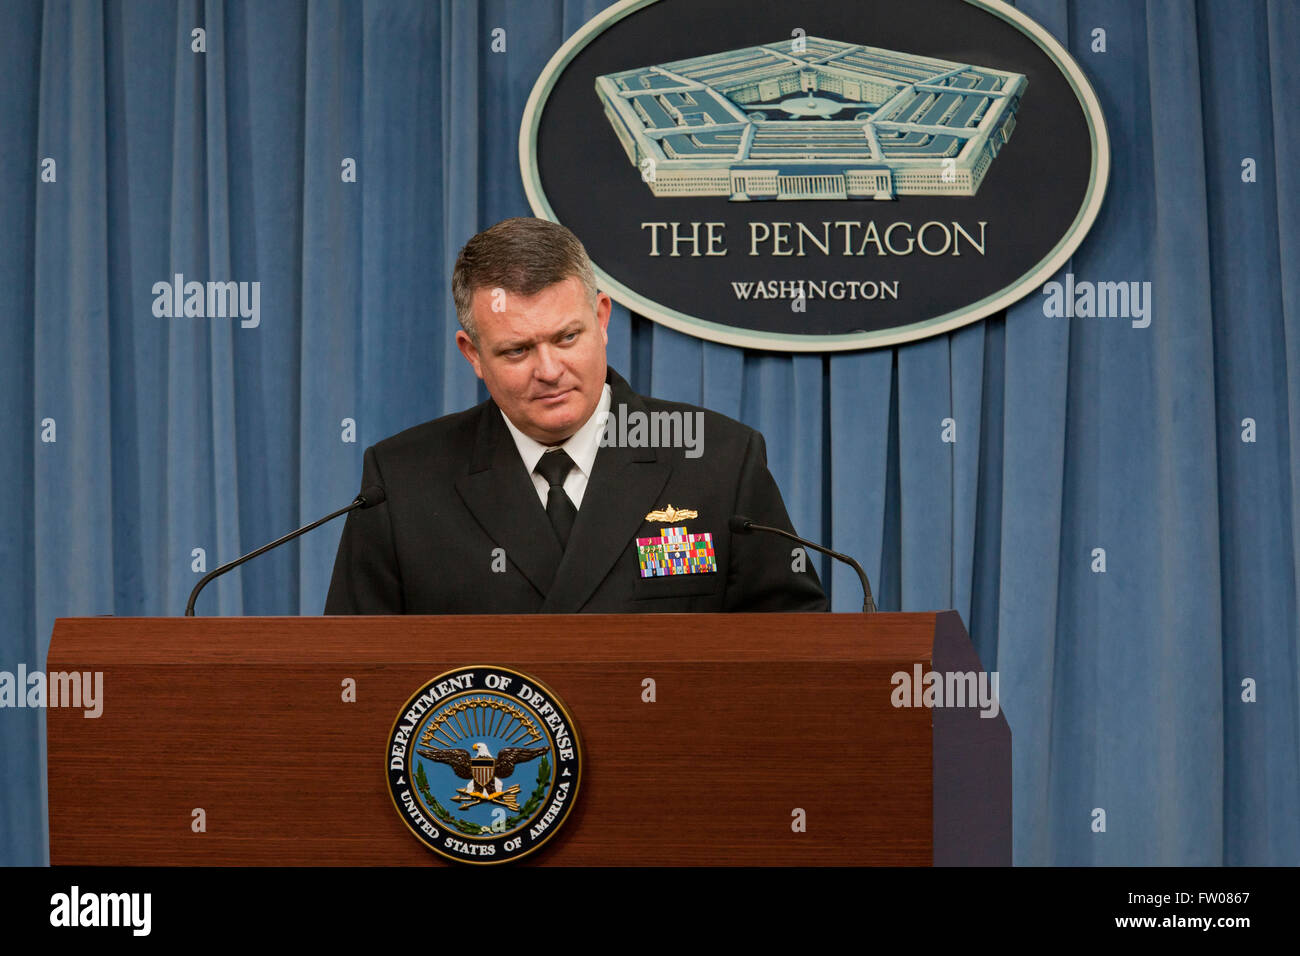 Thursday, March 30, 2016, Washington, DC USA: United Kingdom Maj. Gen. Doug Chalmers, deputy commander, Strategy and Sustainment (S&S) Combined Joint Task Force - Operation Inherent Resolve, briefs media via live video from Southeast Asia to provide an update on operations. Credit:  B Christopher/Alamy Live News Stock Photo